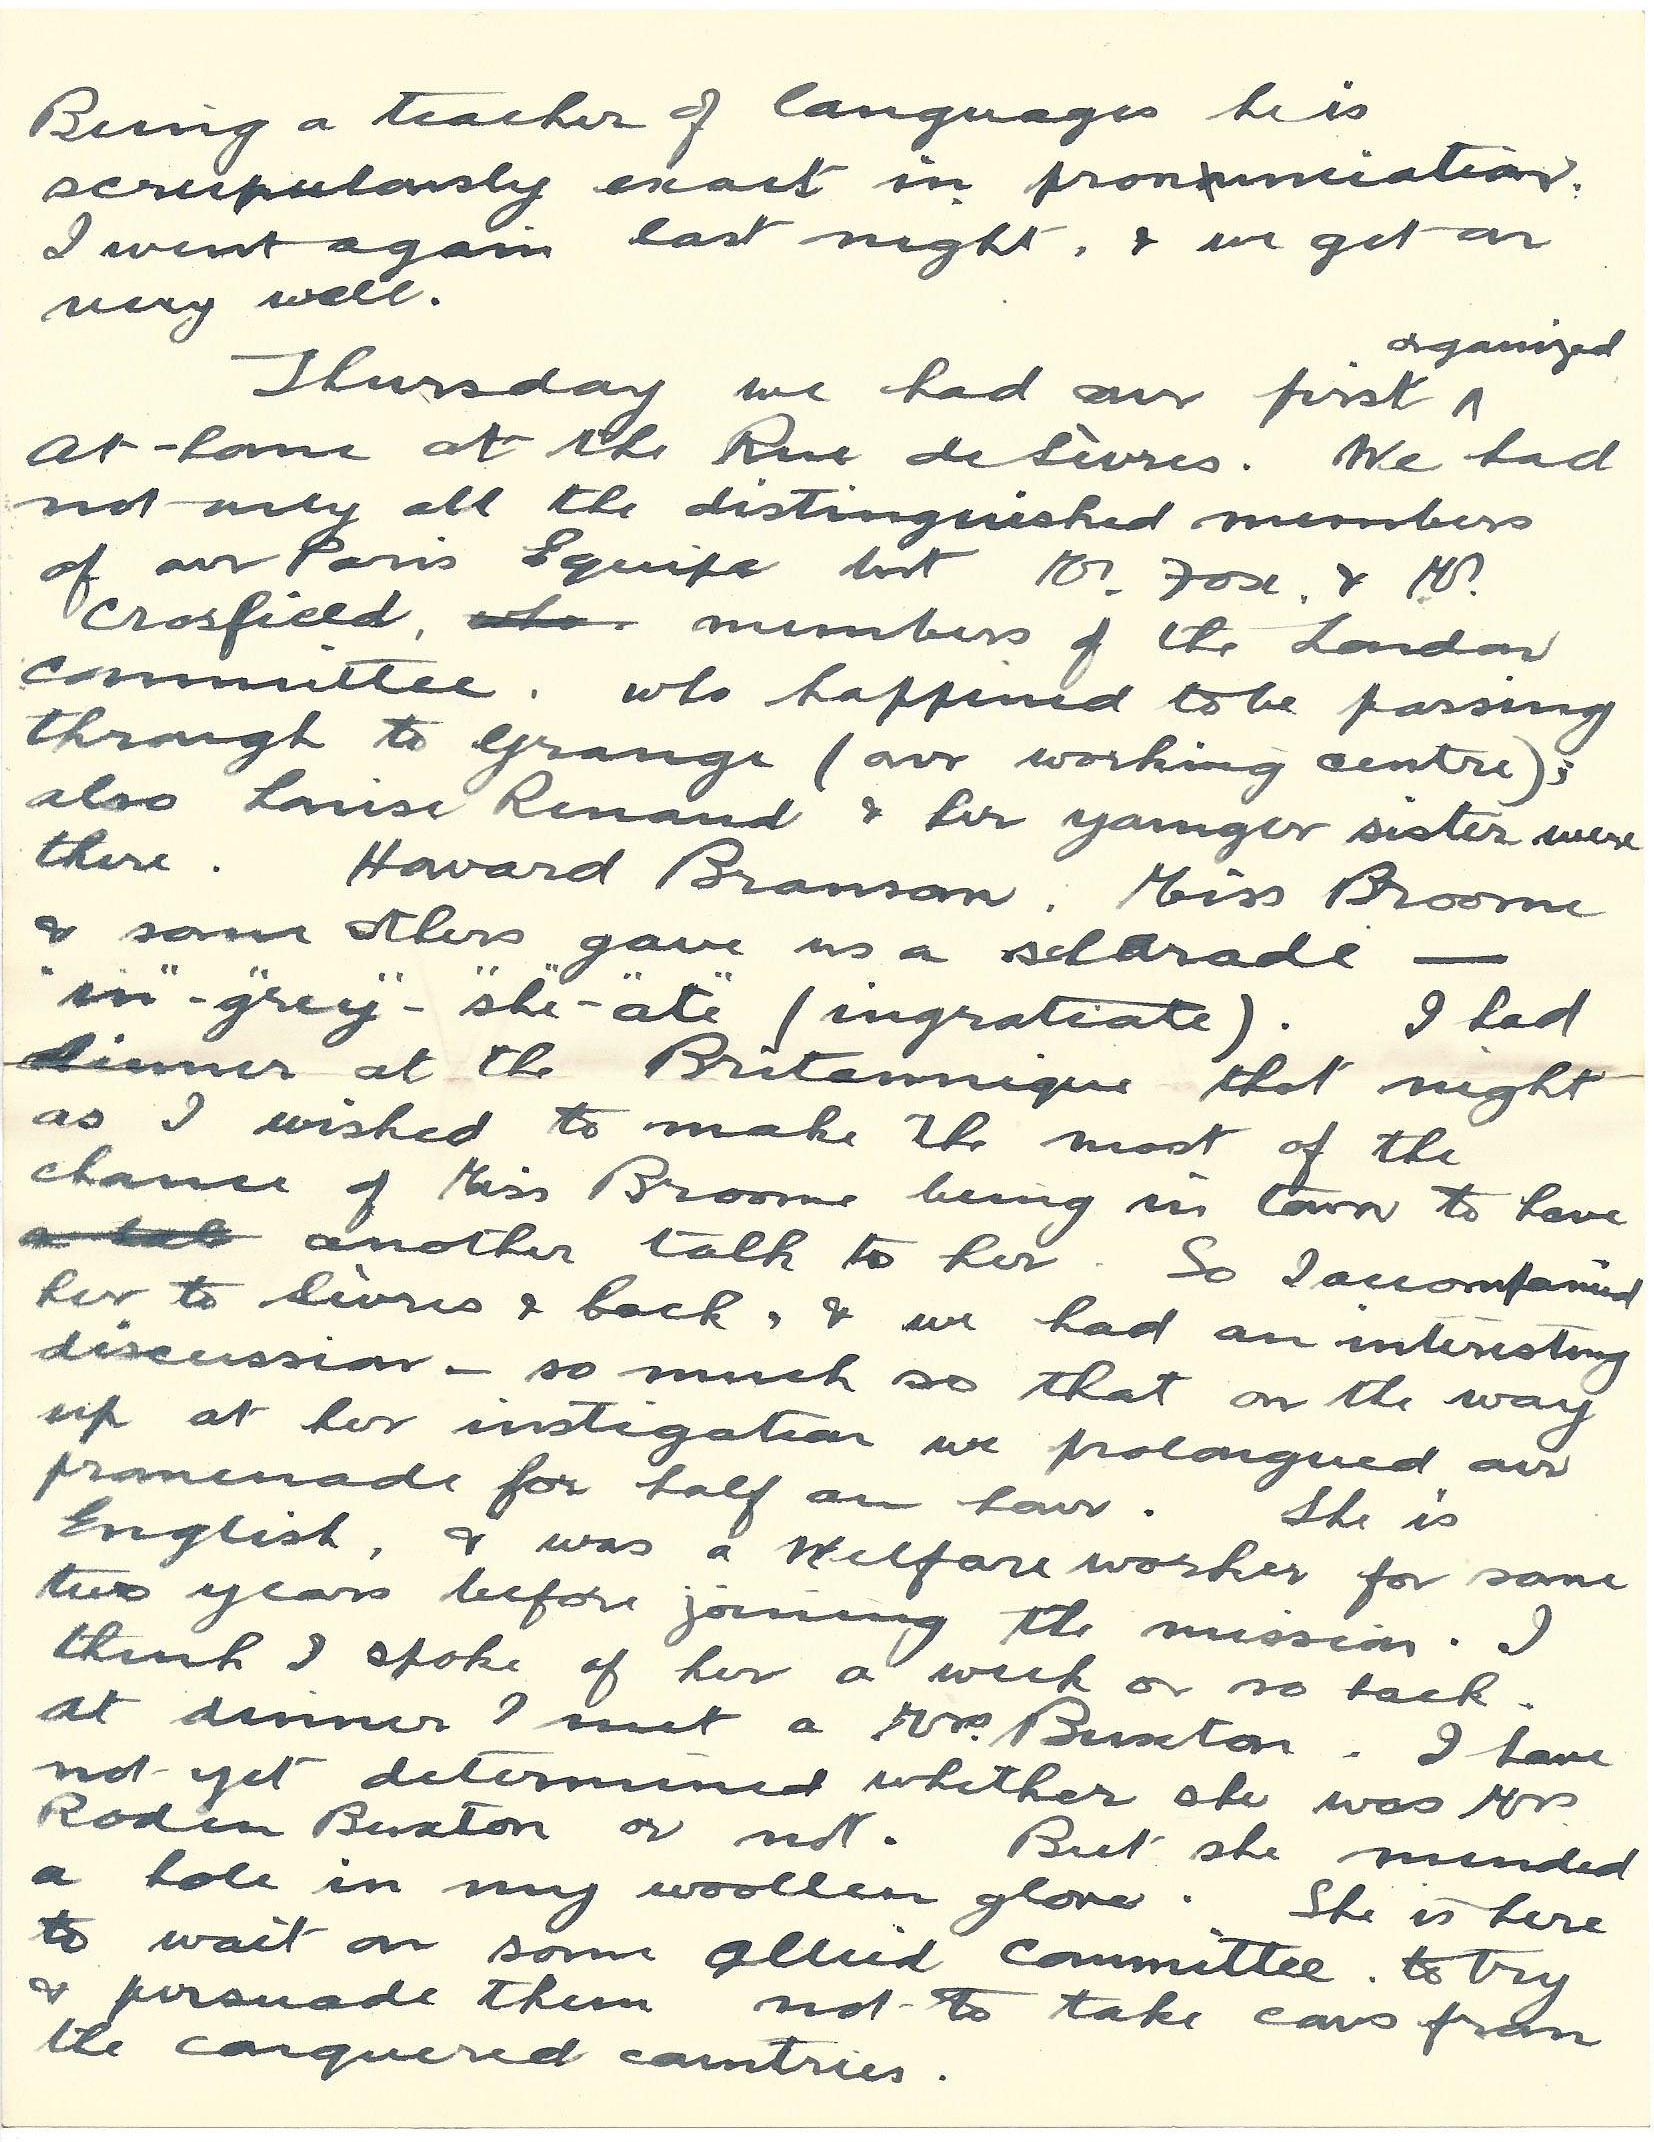 1919-10-19 Page 3 letter by Donald Bearman